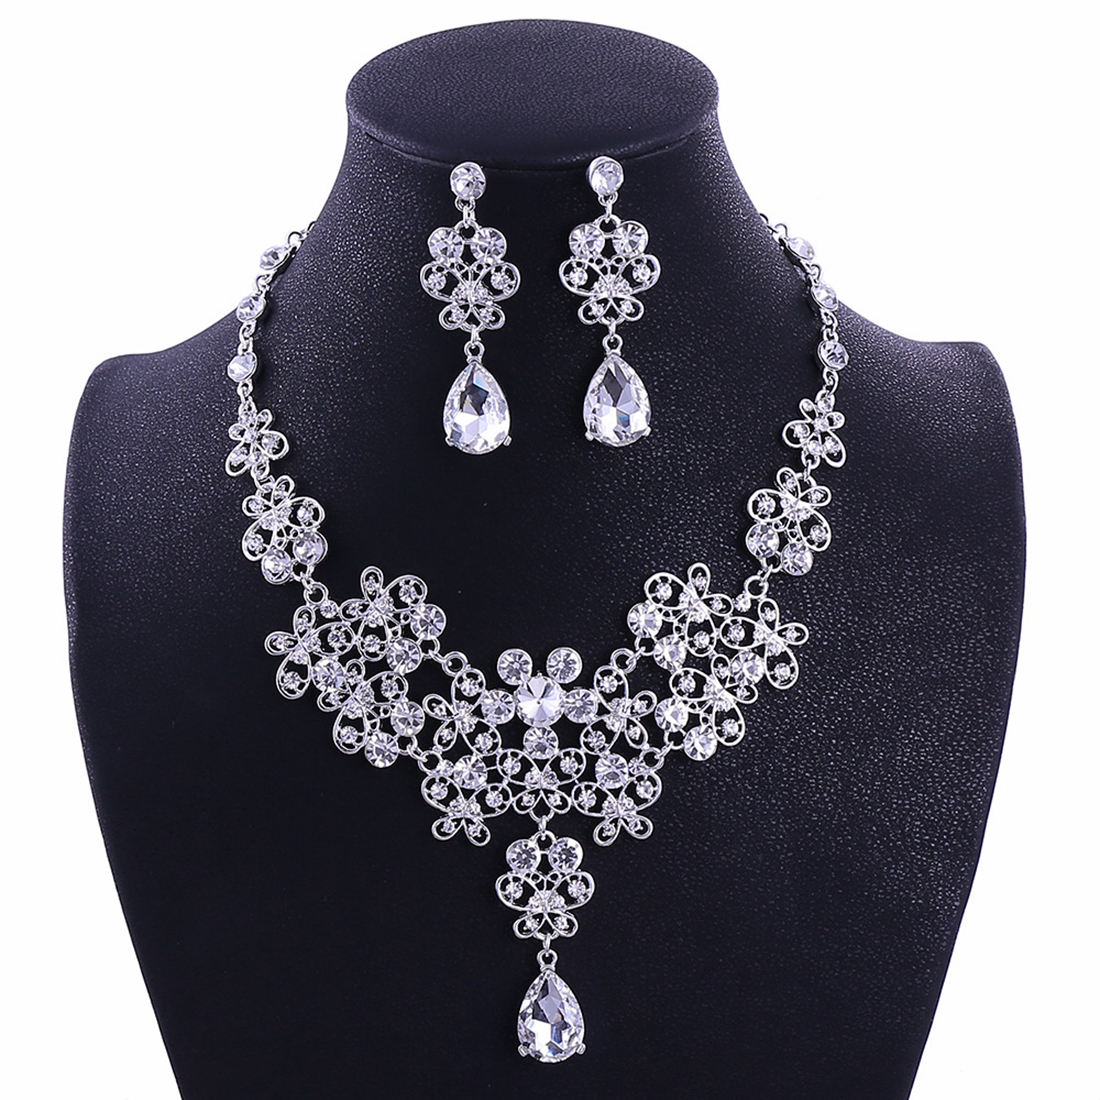 BlingBling Set Crowns Necklace Earrings Alloy Crystal Sequined Bridal Jewelry Accessories Wedding Tiaras Headpieces Hair Bridal Crowns FG010